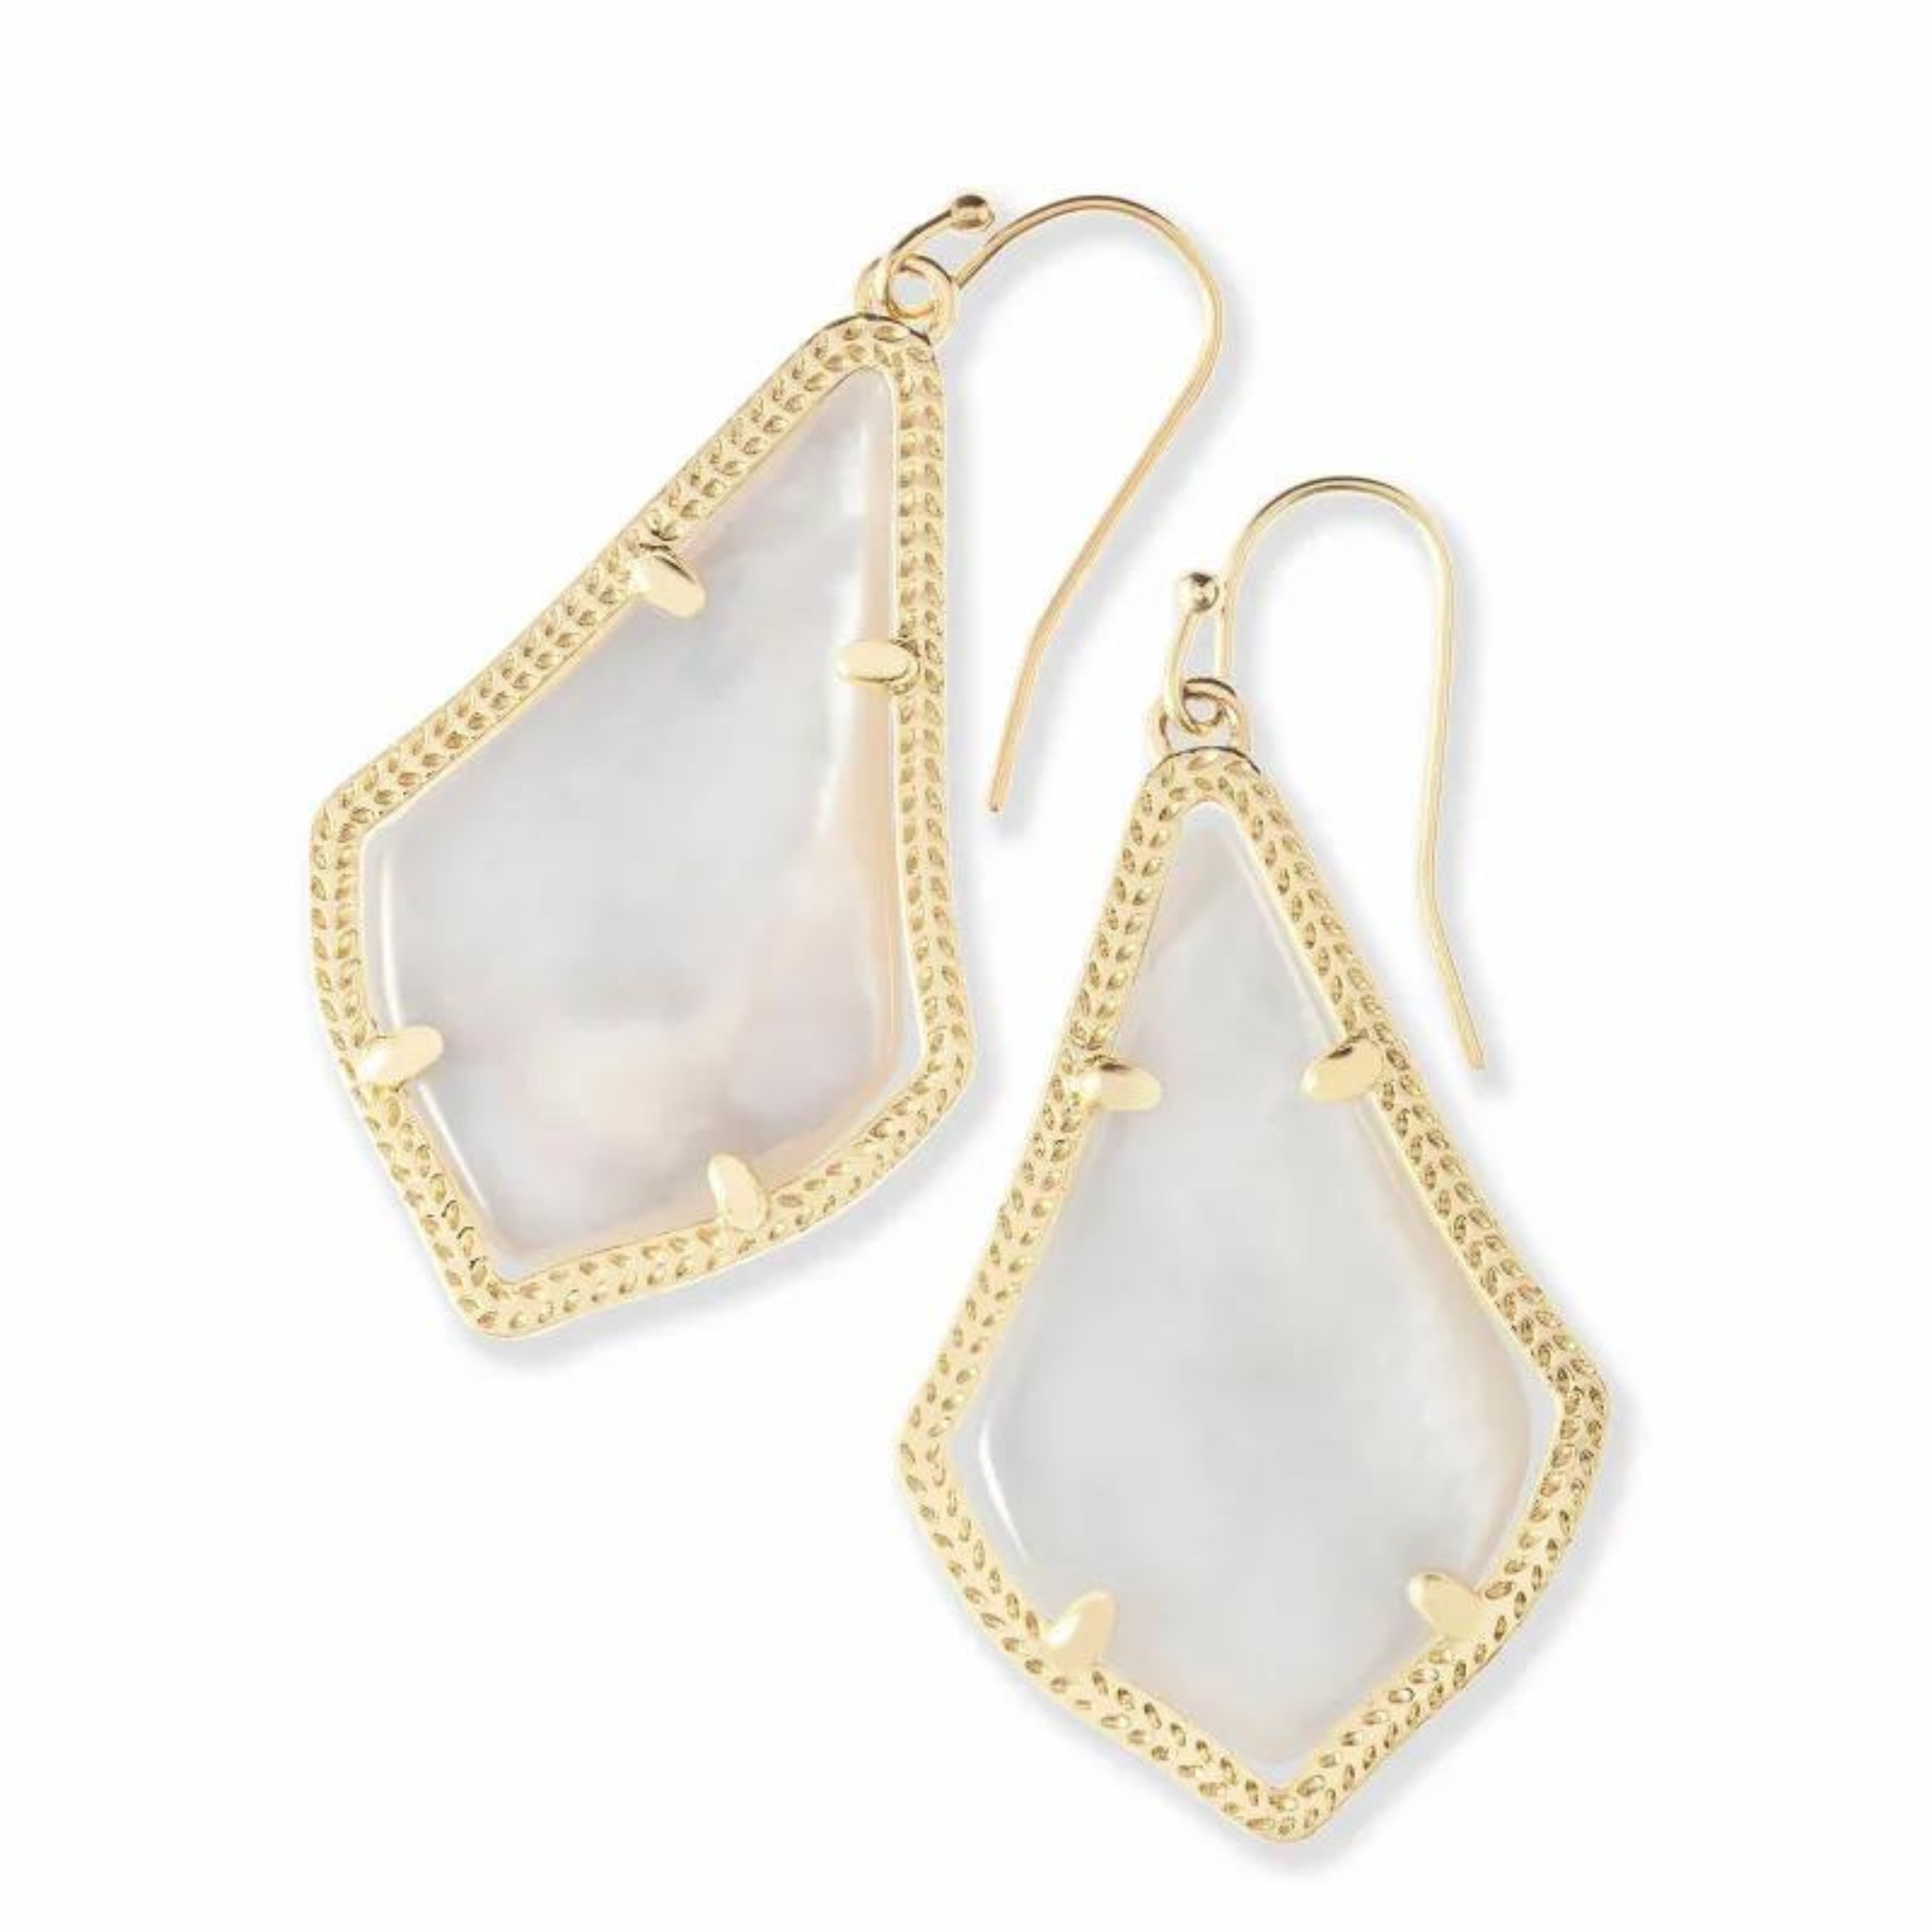 Gold dangle earrings with ivory pearl stone, pictured on a white background.